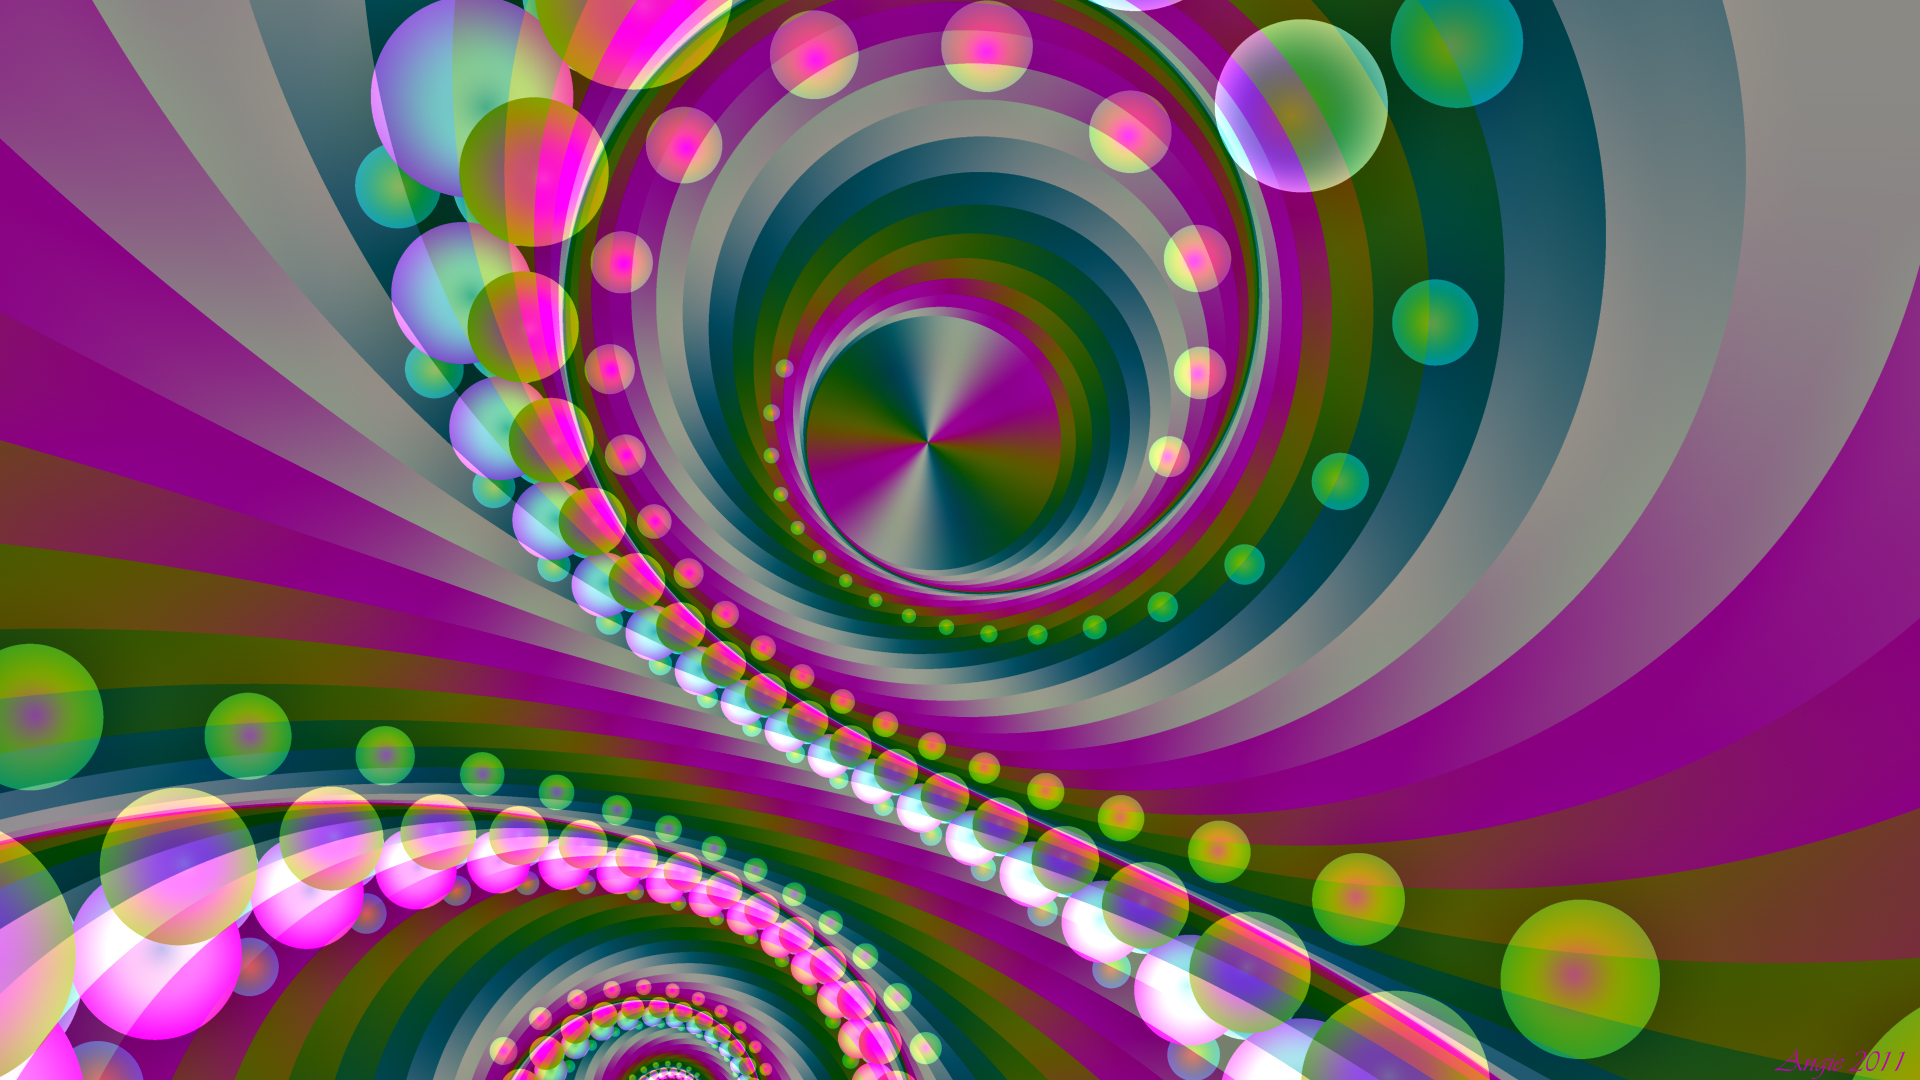 colorful, abstract, swirl, circle, colors, spiral